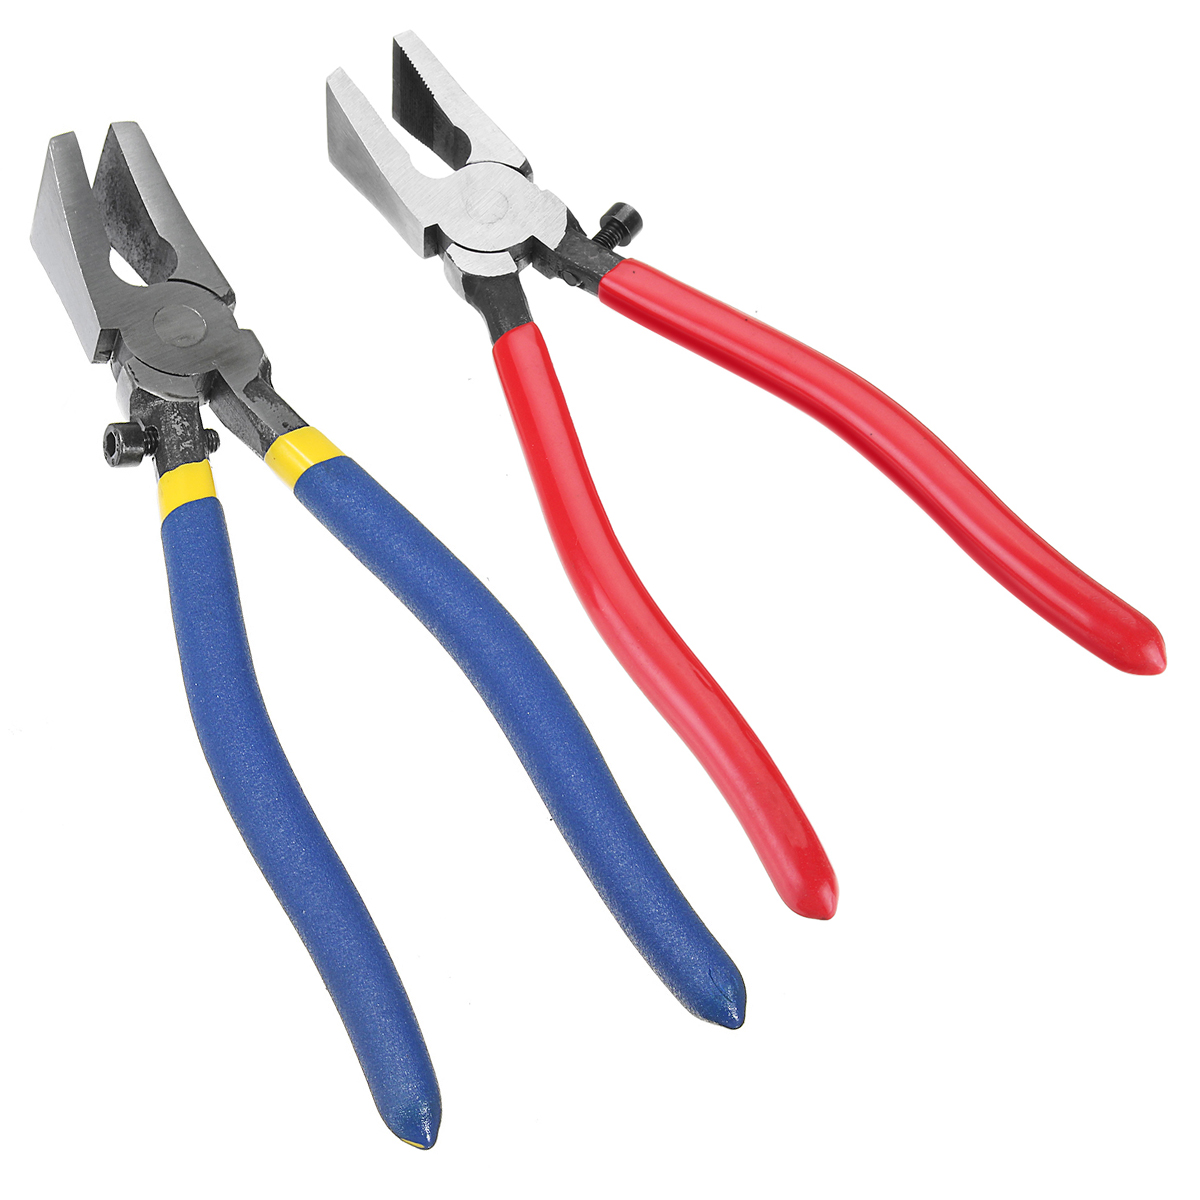 Stained-Glass-Tool-Kit-Running-Pliers-Breaking-Grozing-Pliers-Grip-Cutter-Non-slip-Handle-1334030-3